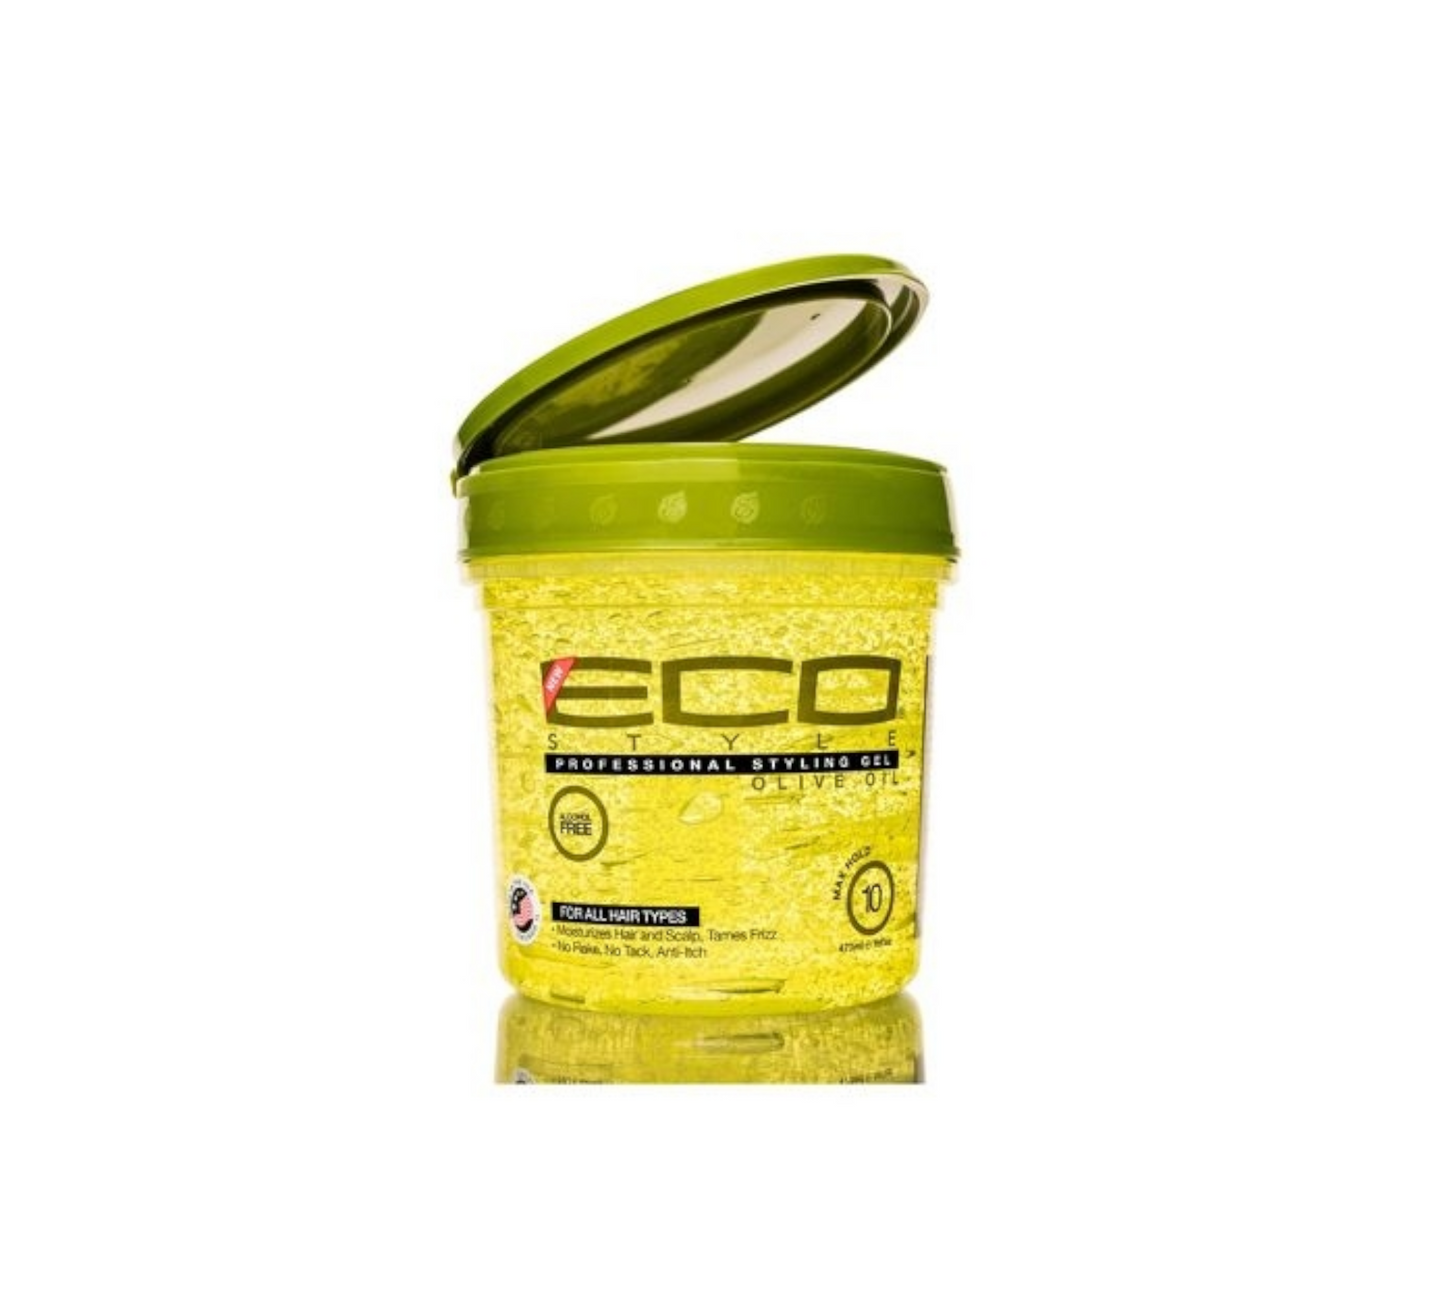 Eco Cupid Beauty Supplies Hair Gel Eco Style Professional Olive Styling Gel